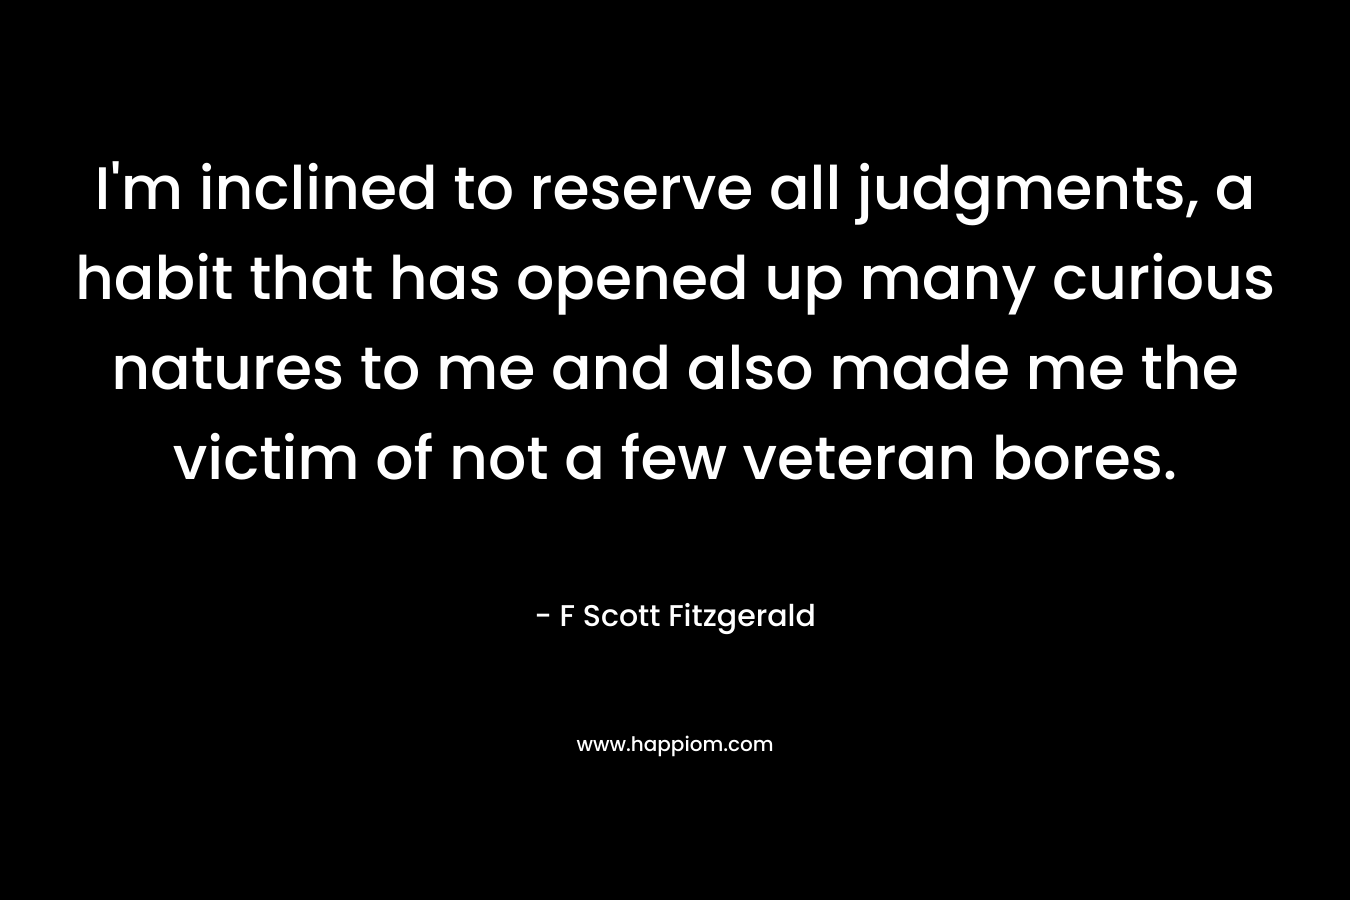 I’m inclined to reserve all judgments, a habit that has opened up many curious natures to me and also made me the victim of not a few veteran bores. – F Scott Fitzgerald